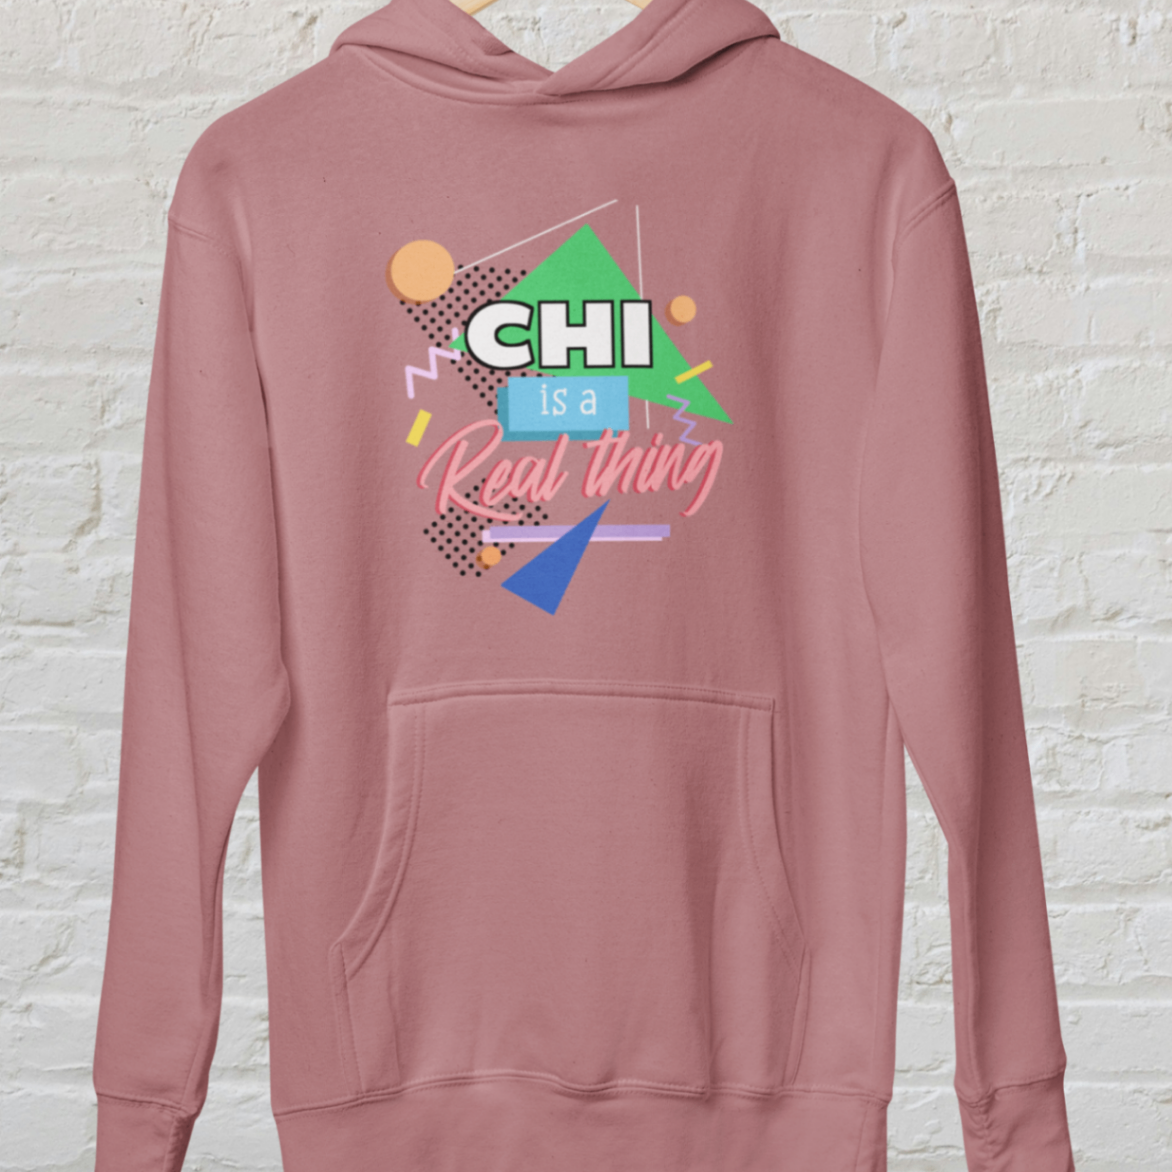 hoodie dusty rose 'Chi is a real thing' design white brick backround